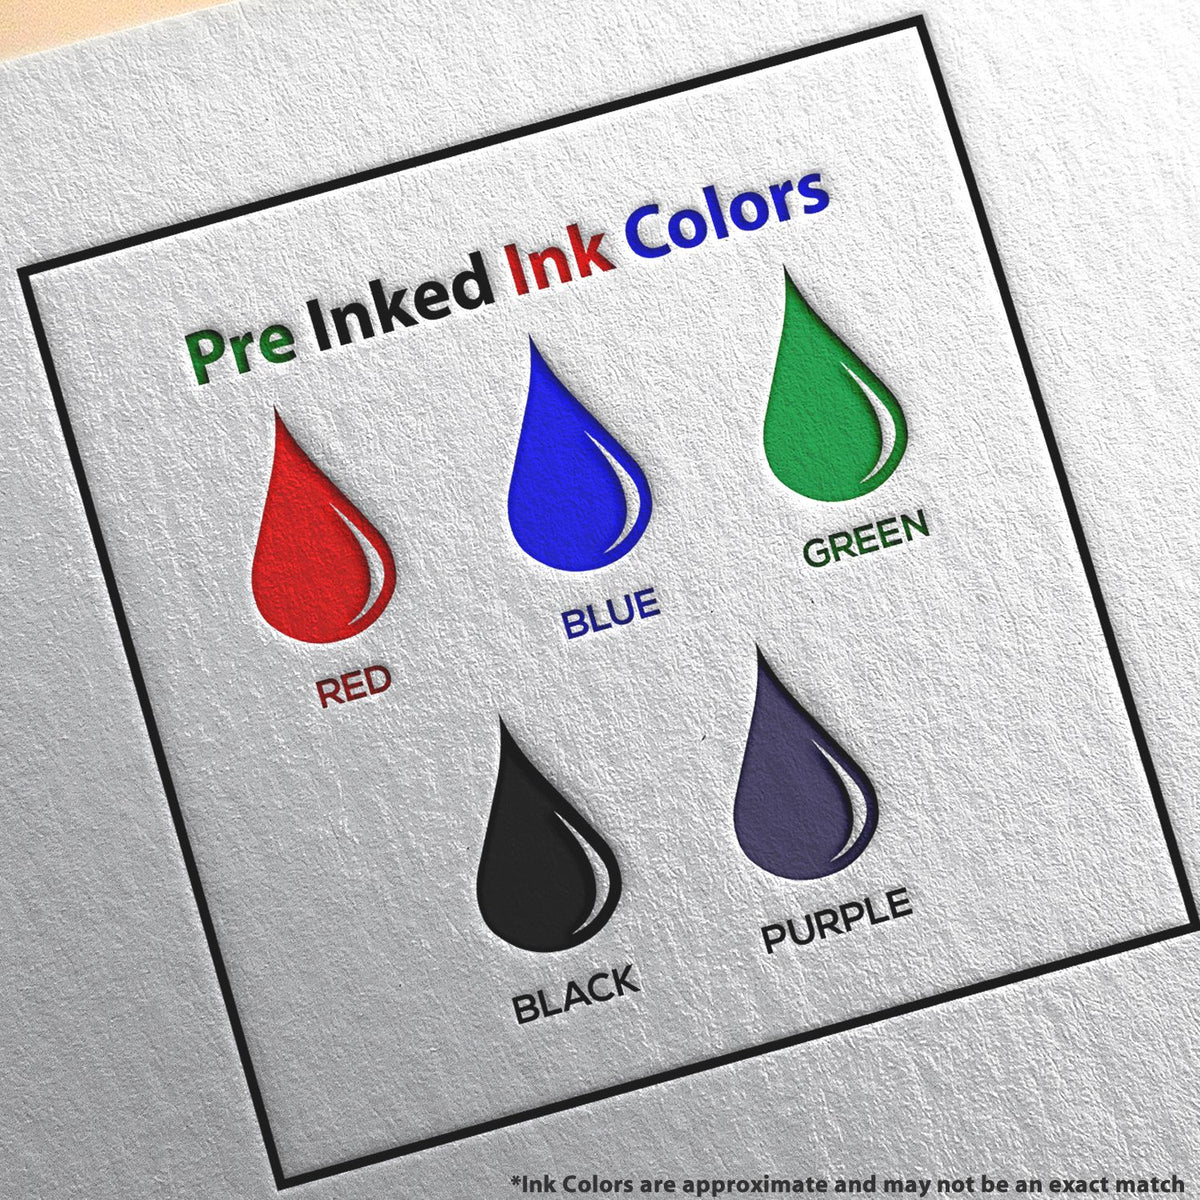 A picture showing the different ink colors or hues available for the Super Slim Washington Notary Public Stamp product.